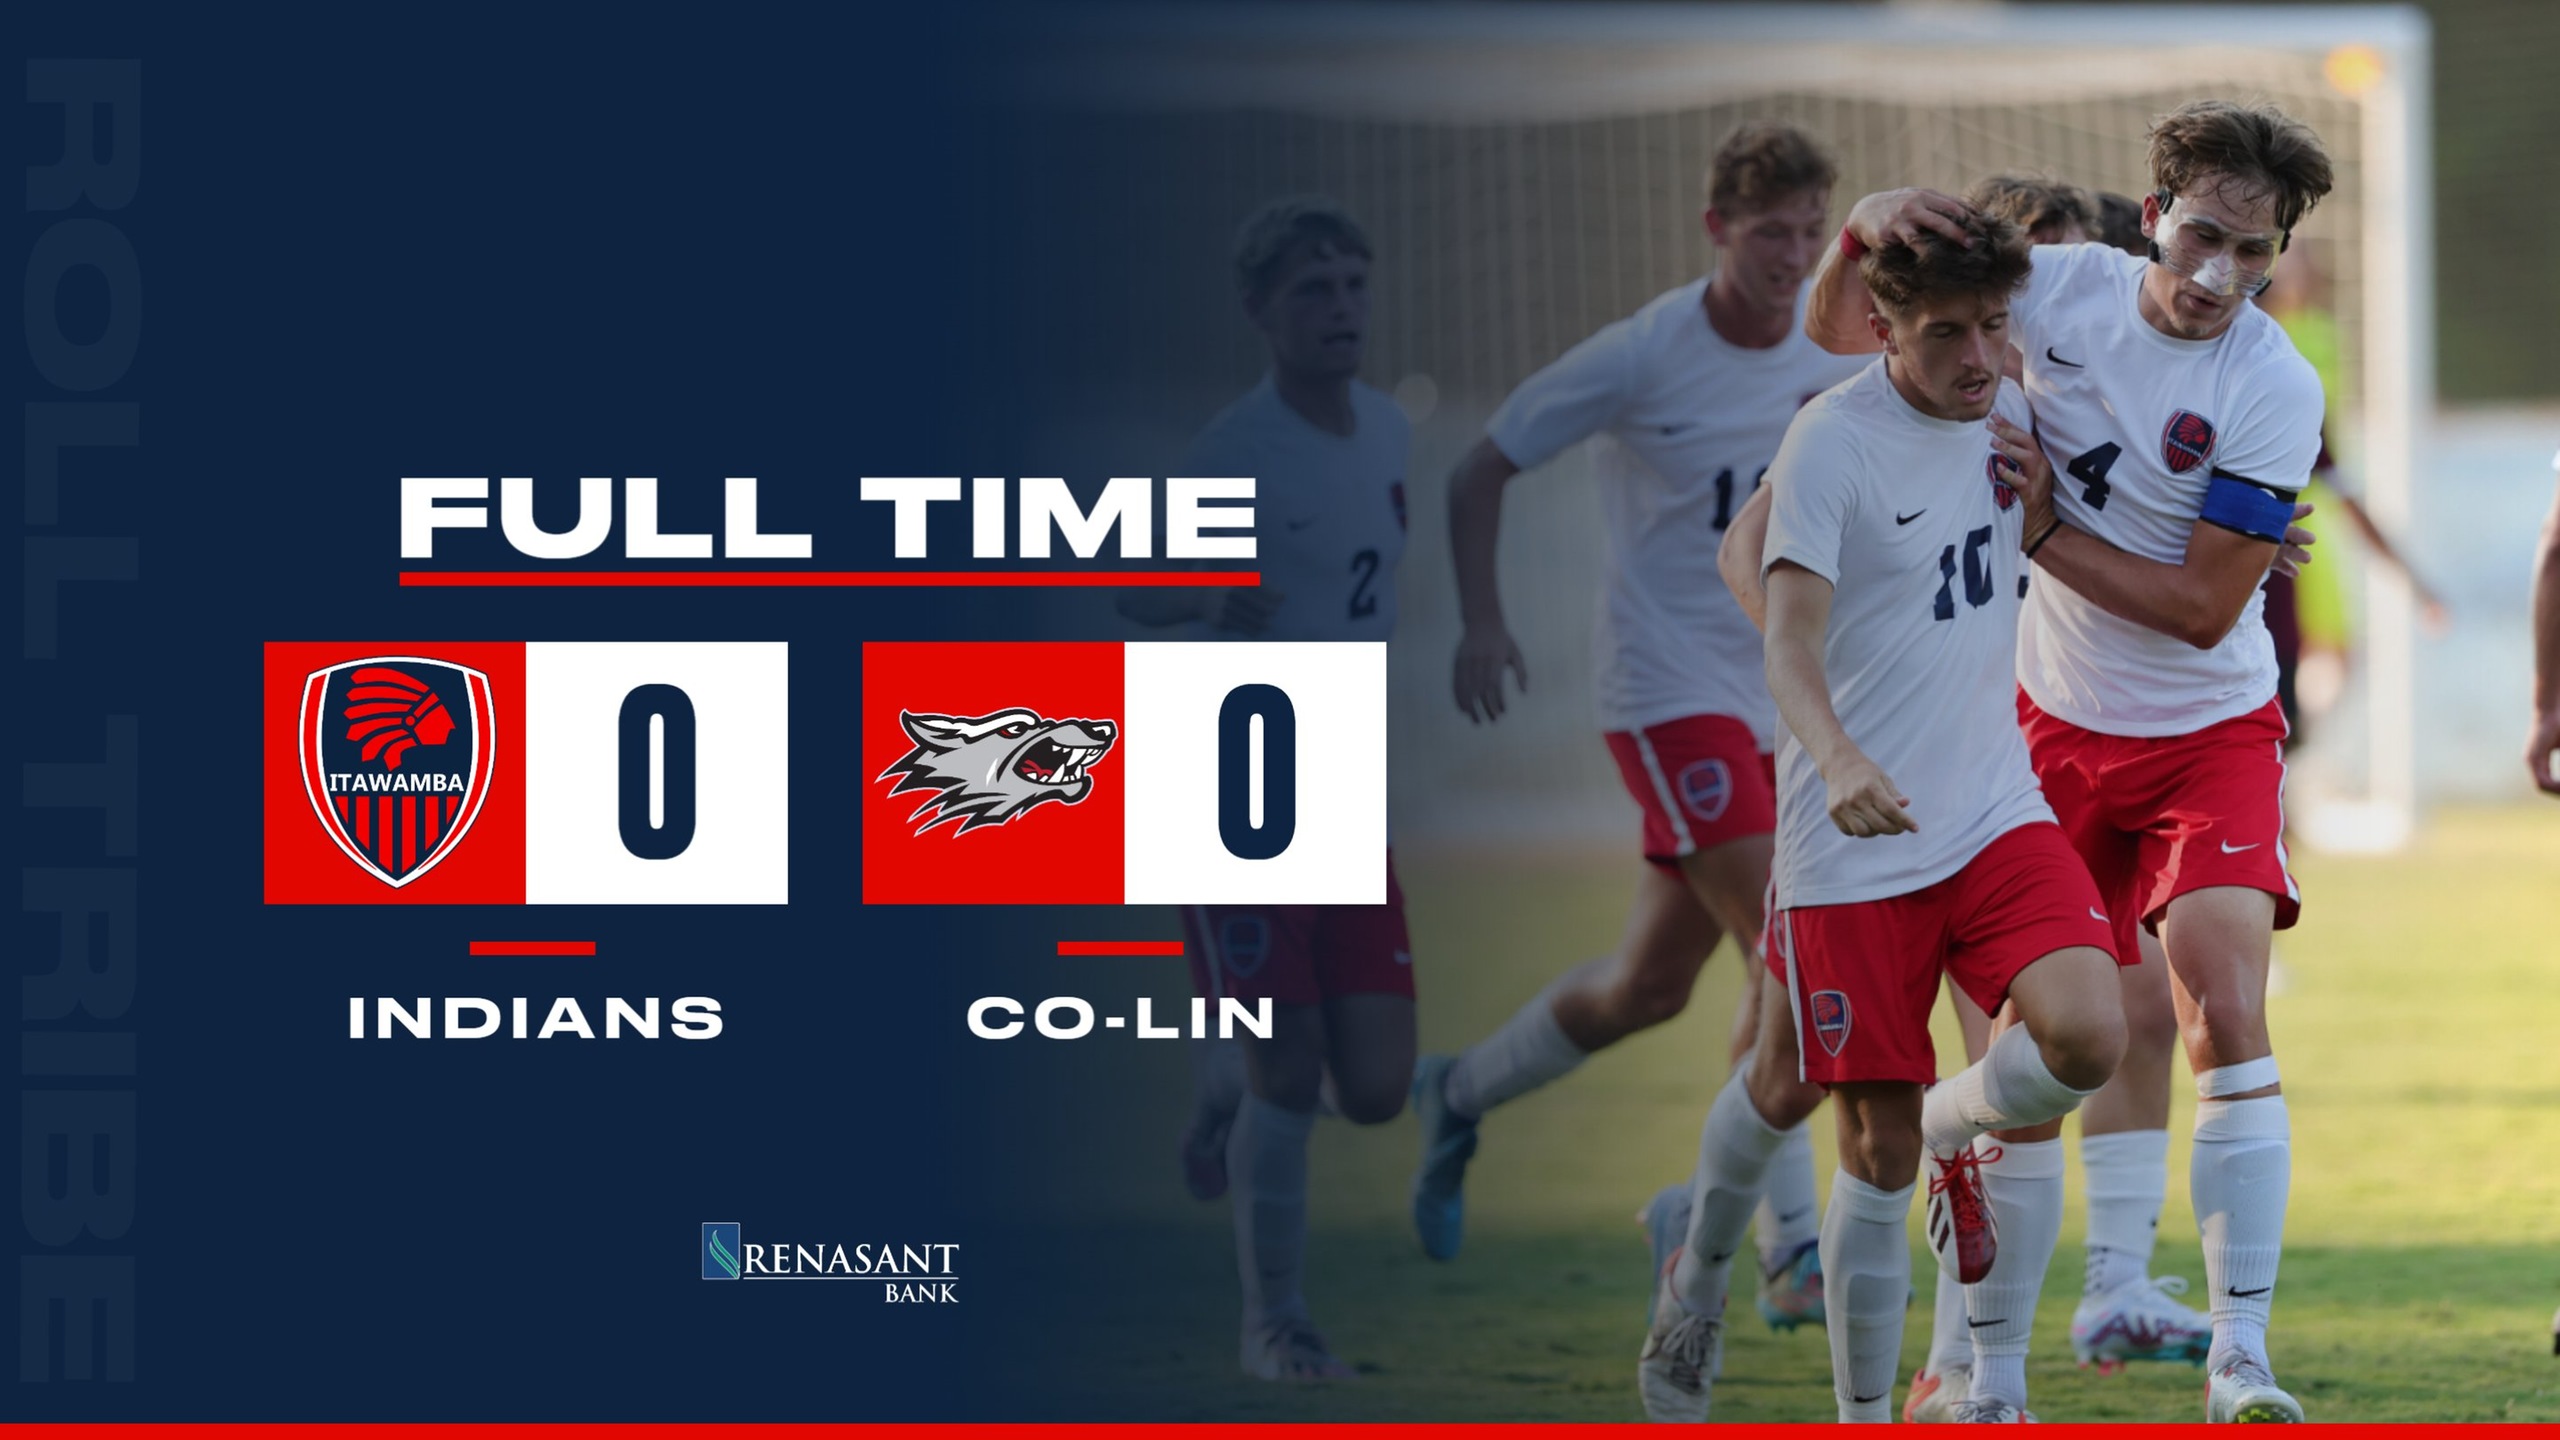 Indians end battle with Co-Lin in draw